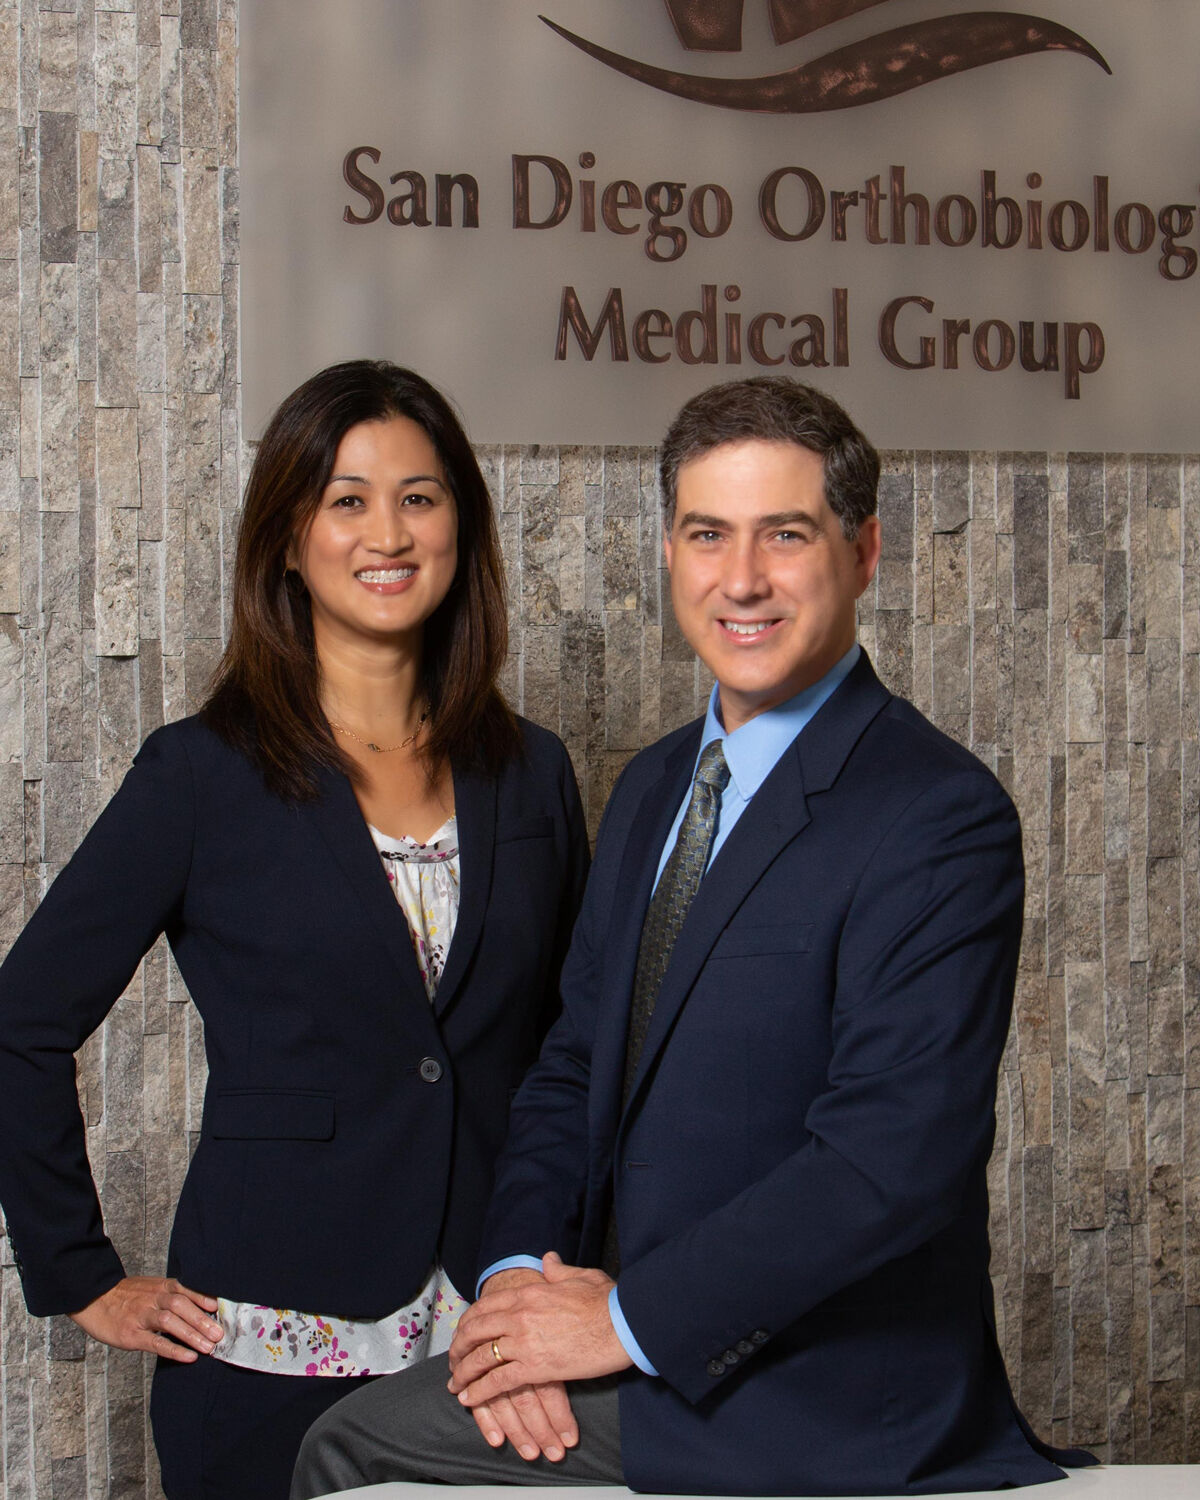 Faces of Health Care 2020 / San Diego Orthobiologics Medical Group